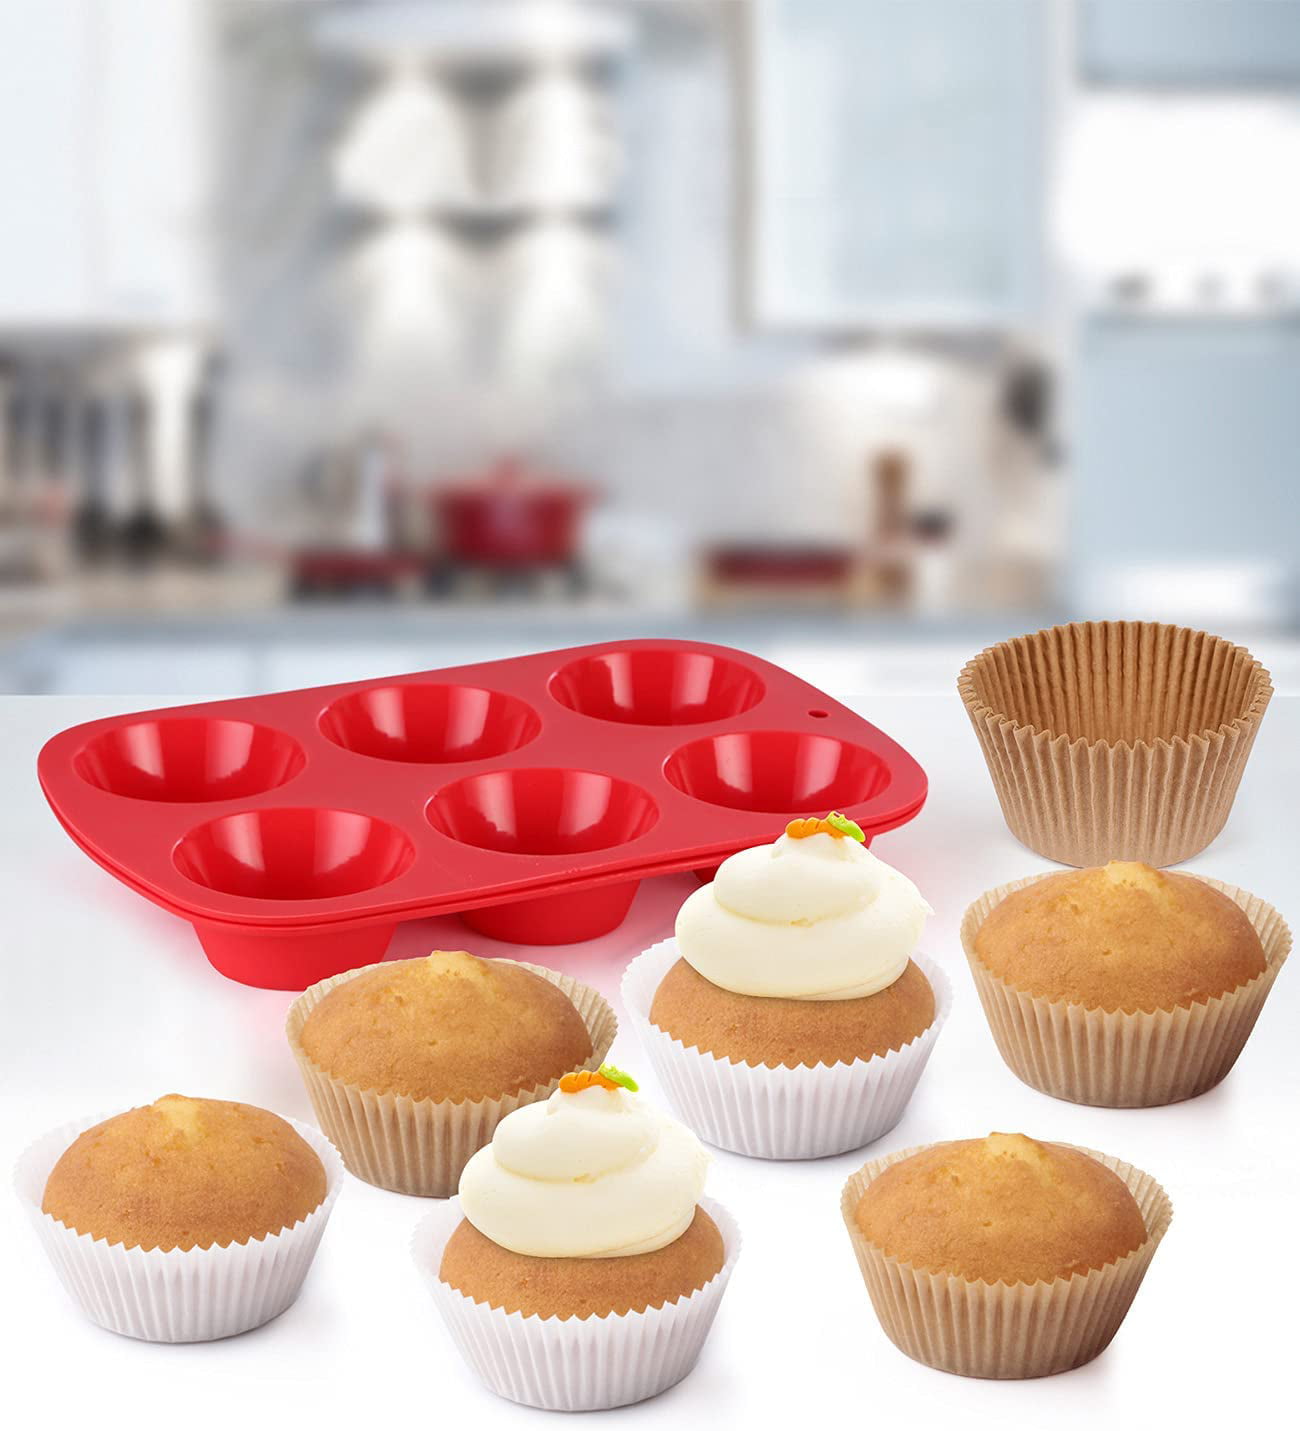 Gifbera 200pcs Colorful Tulip Cupcake Liners Paper Muffin Baking Cups,  Unbleached Parchment Paper Tu…See more Gifbera 200pcs Colorful Tulip  Cupcake